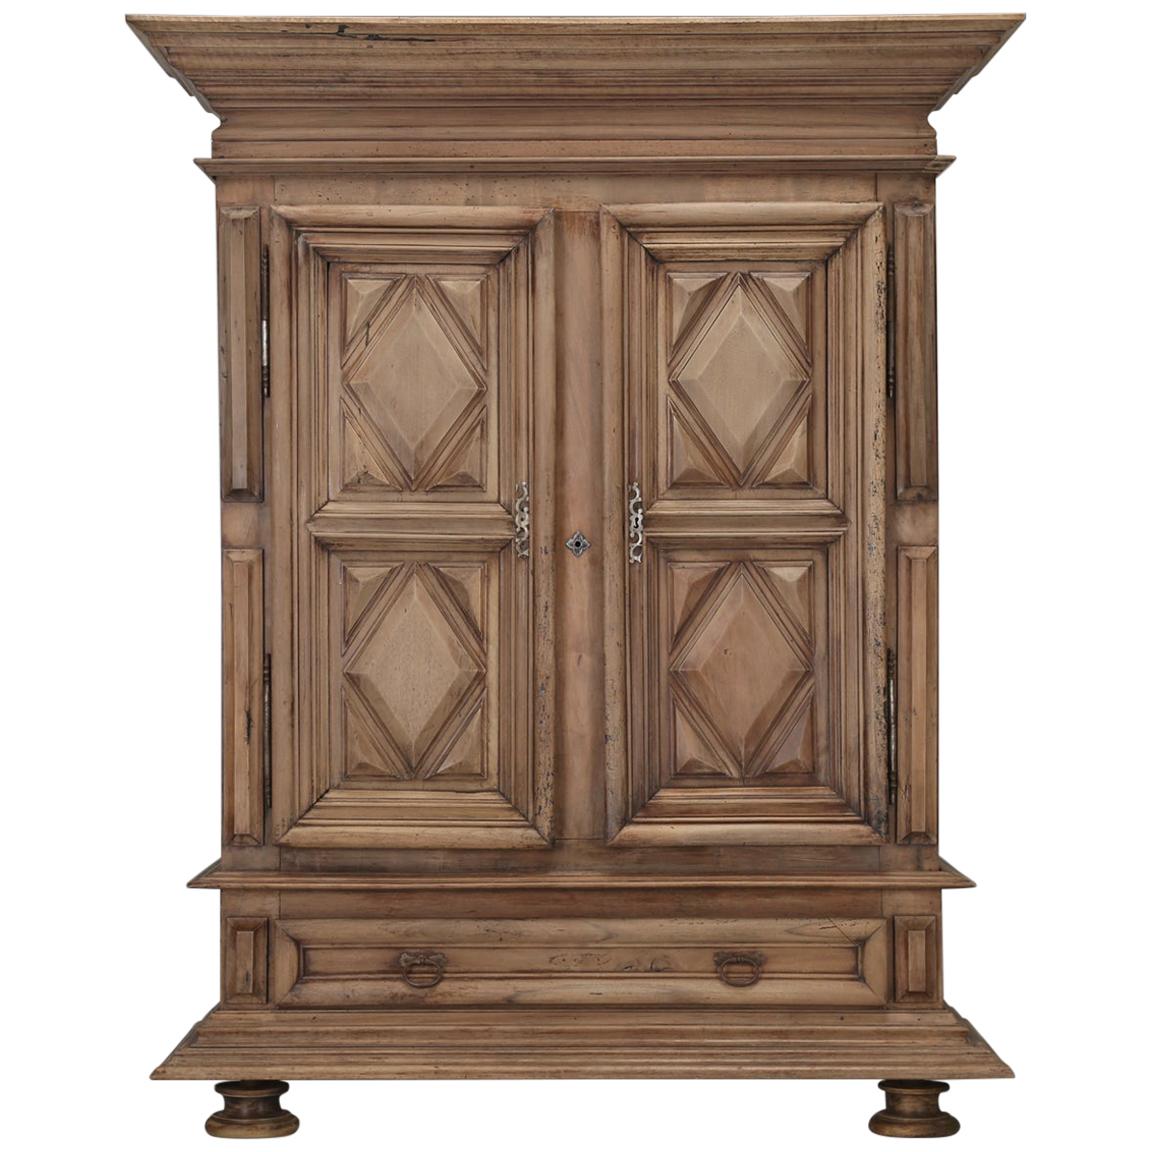 French Louis XIII Armoire circa 1700s, in Original Finish from Pamiers, France